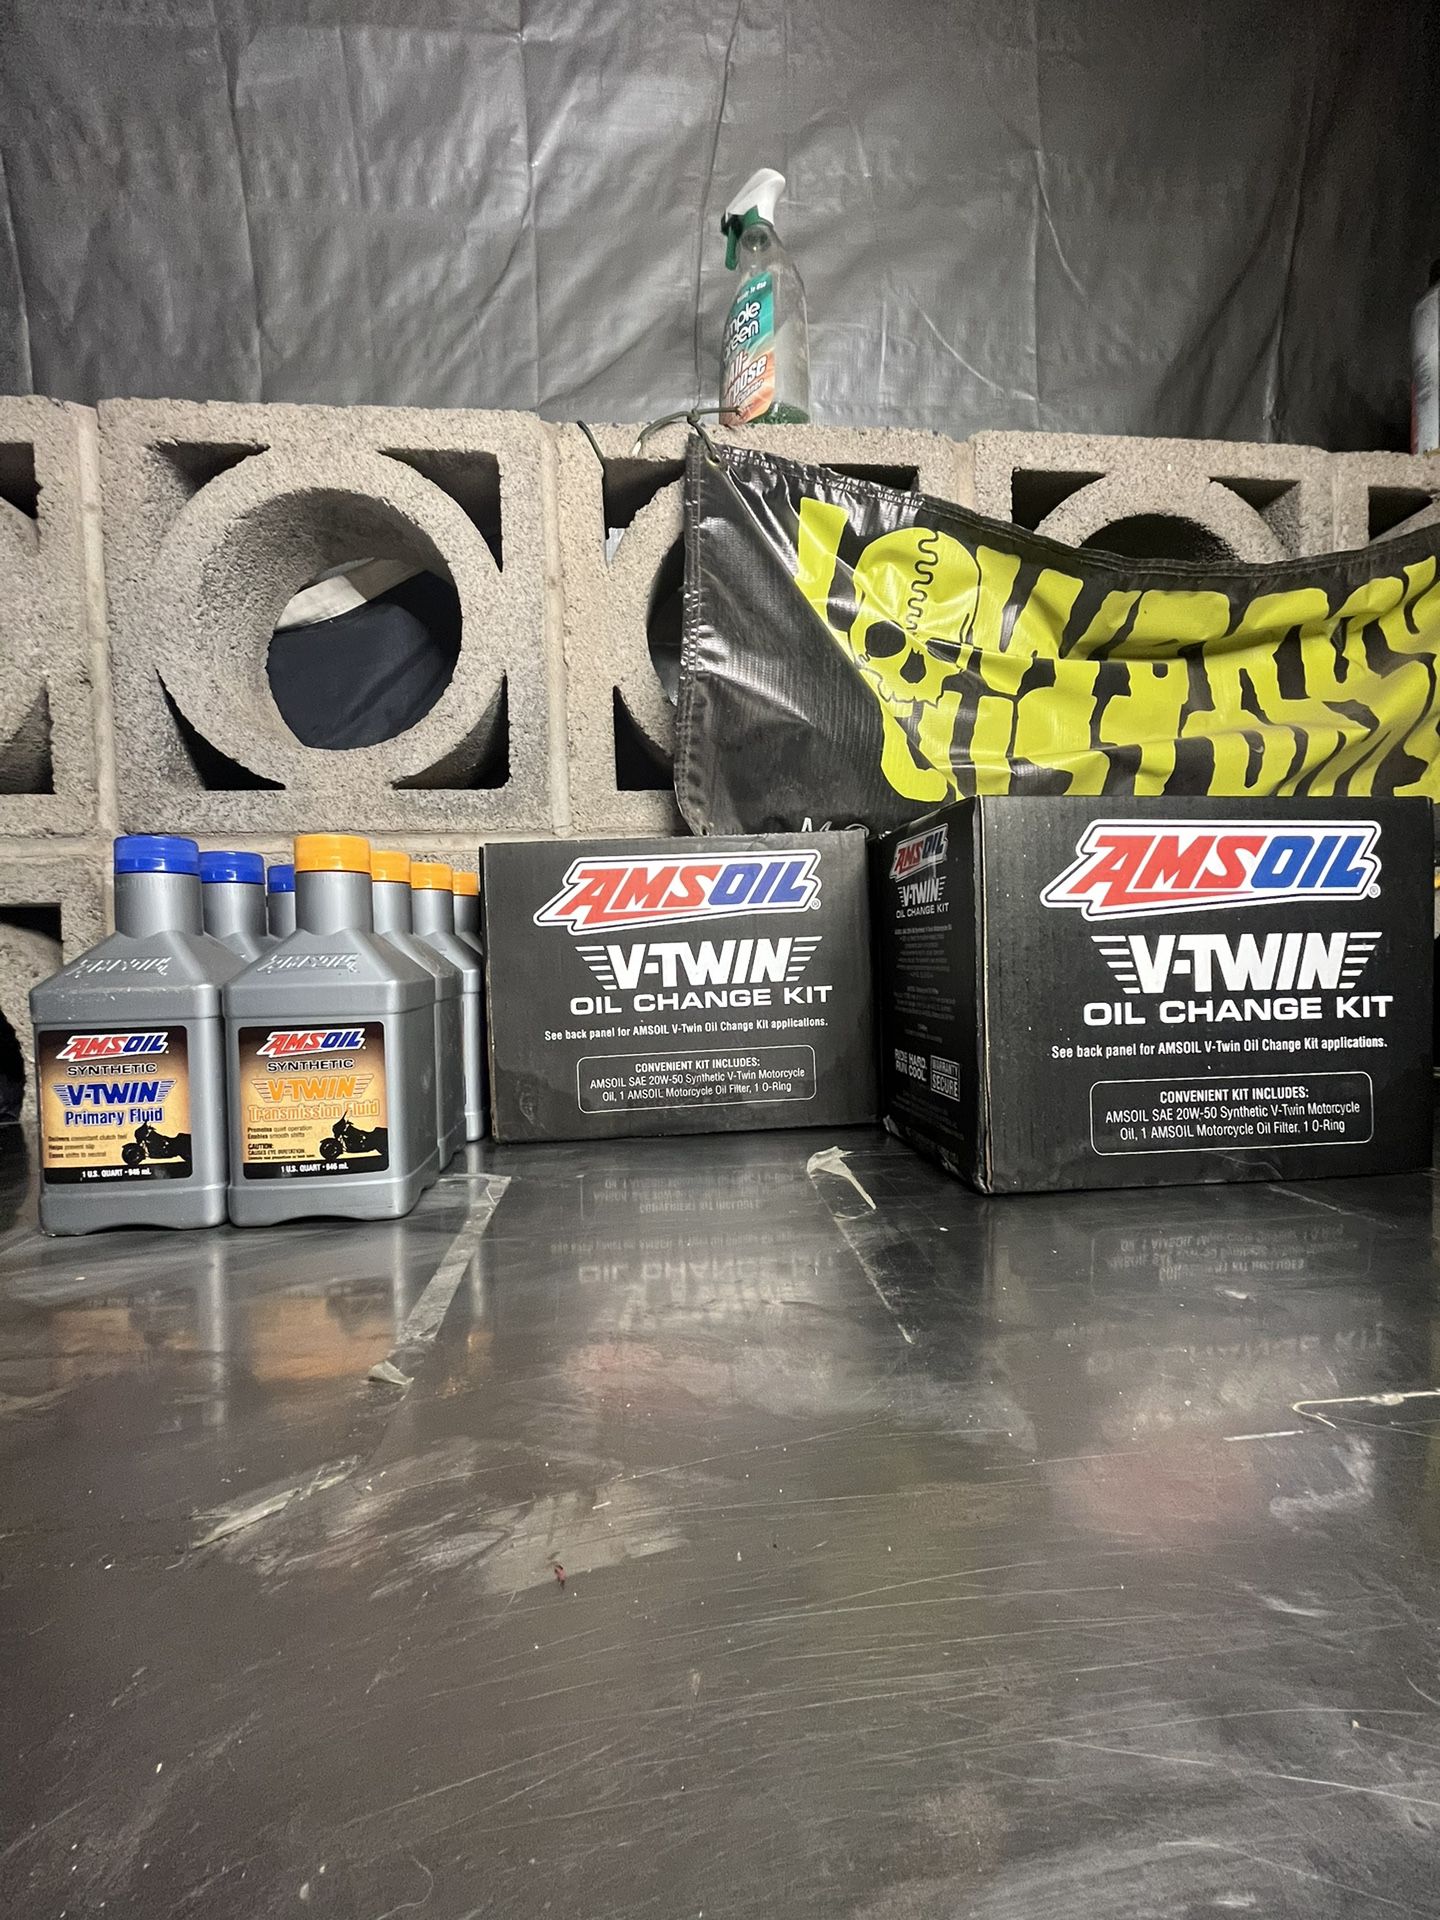 Synthetic V-Twin SAE 20W-50 Motorcycle Oil Change Kit by AMSOIL at